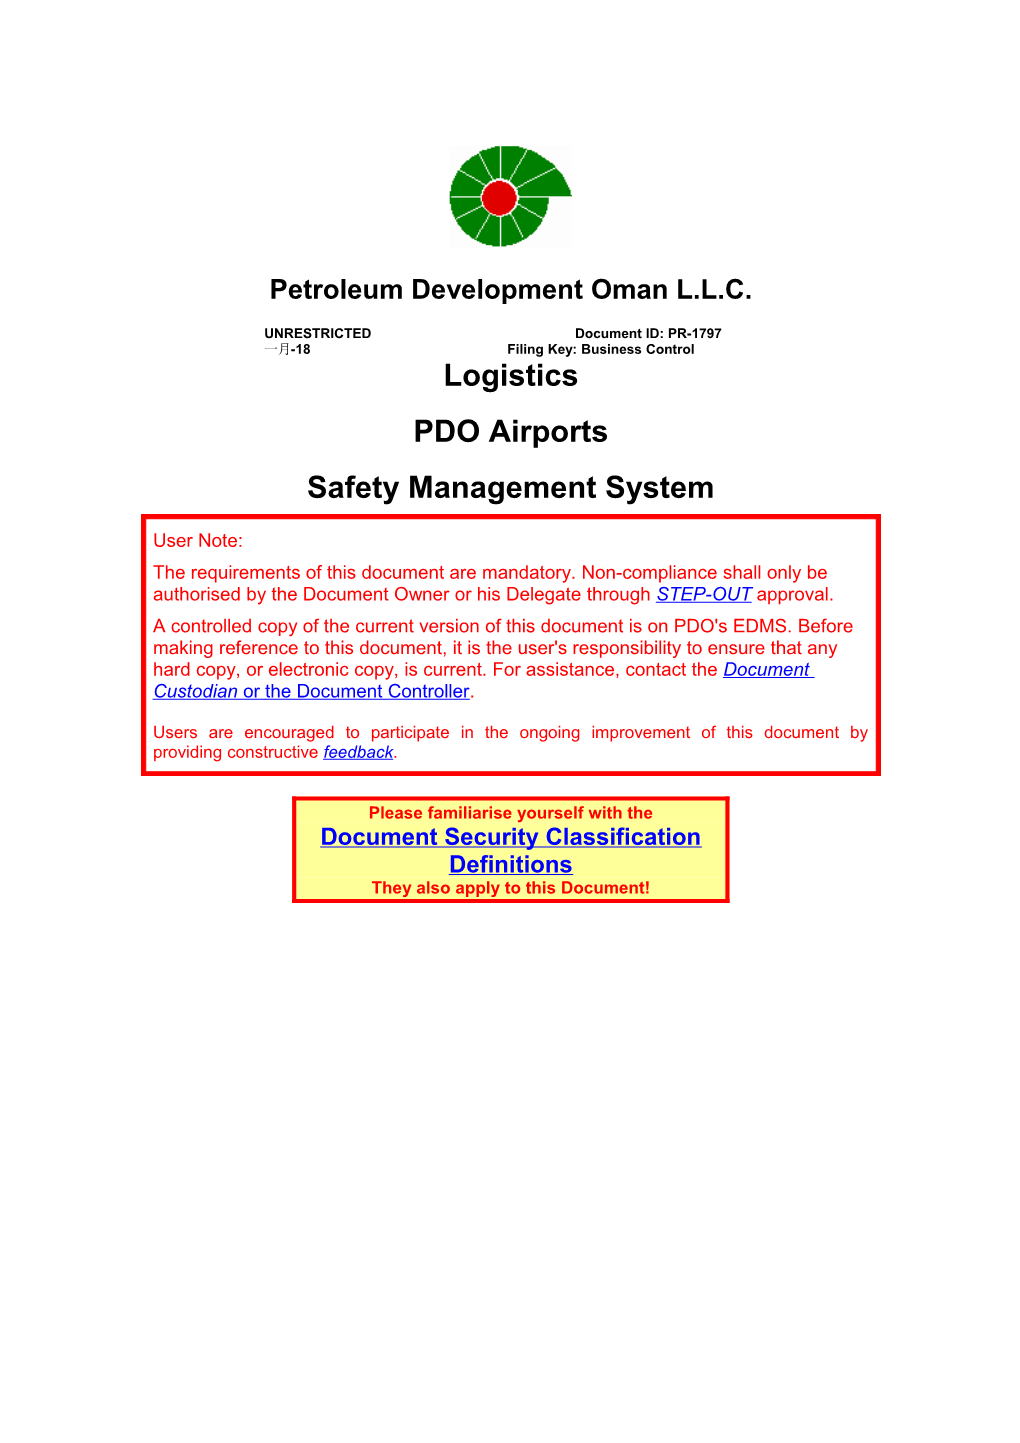 PDO Airports Safety Management System